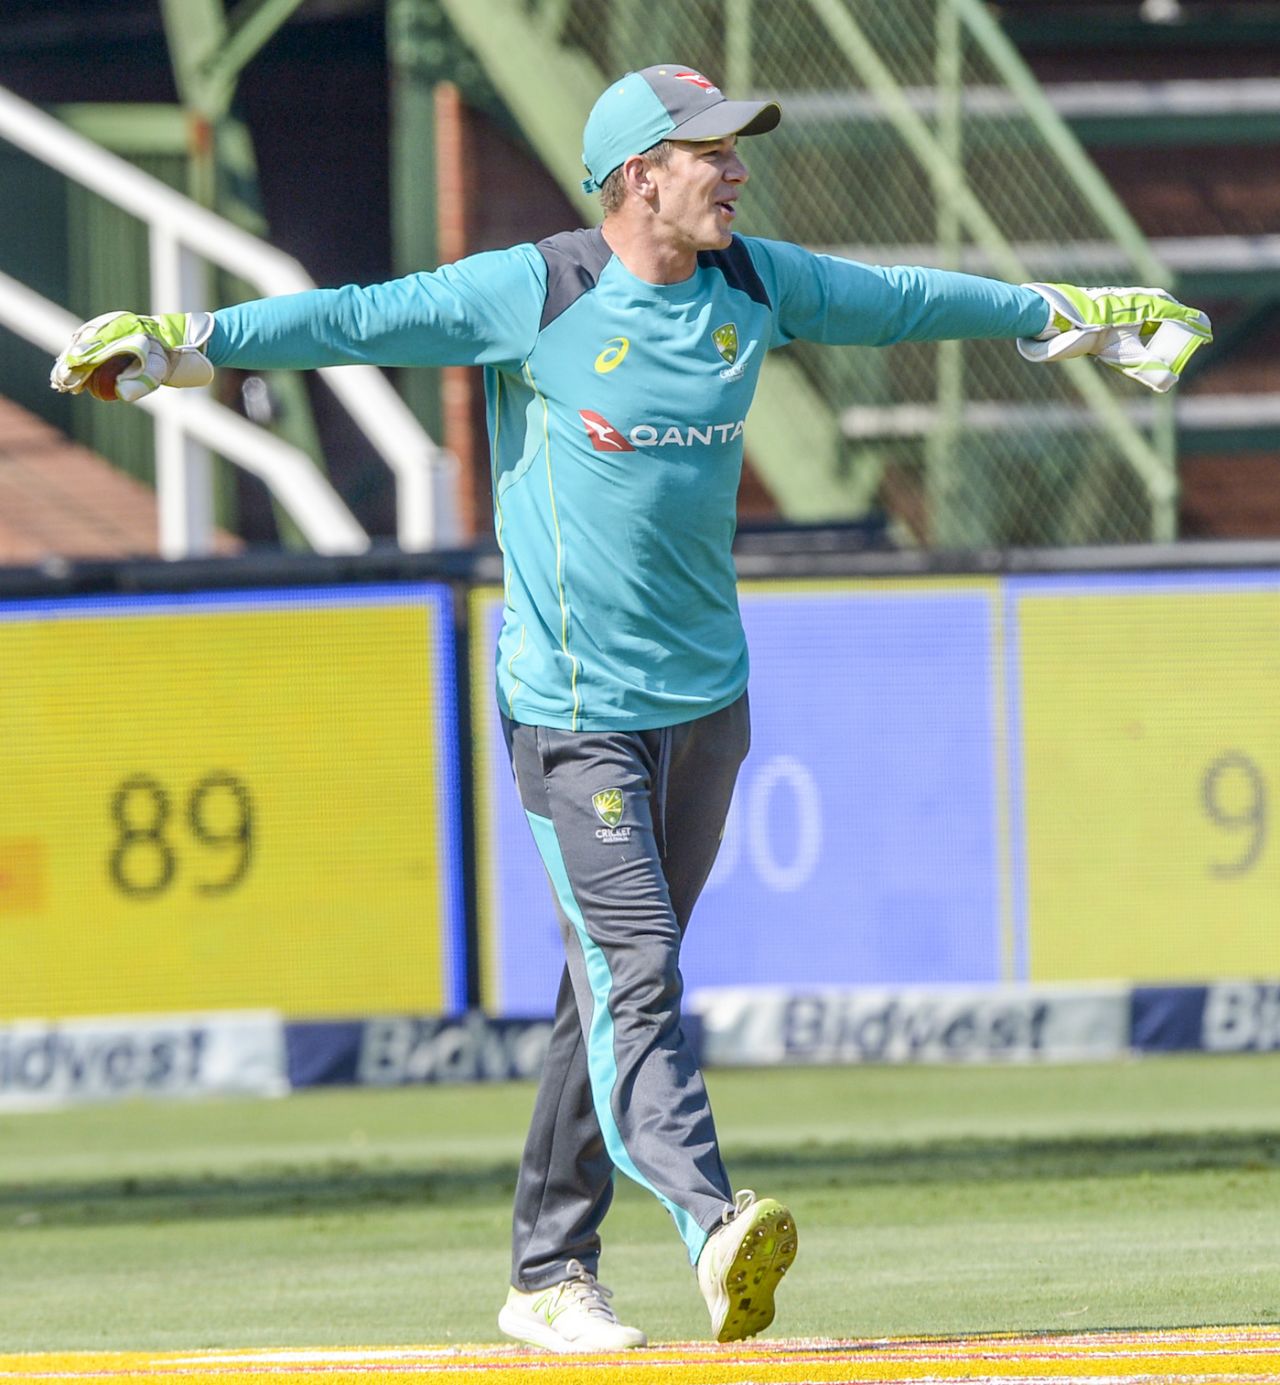 Australia's new Test captain Tim Paine at a practice session at the Wanderers, Johannesburg, March 29, 2018